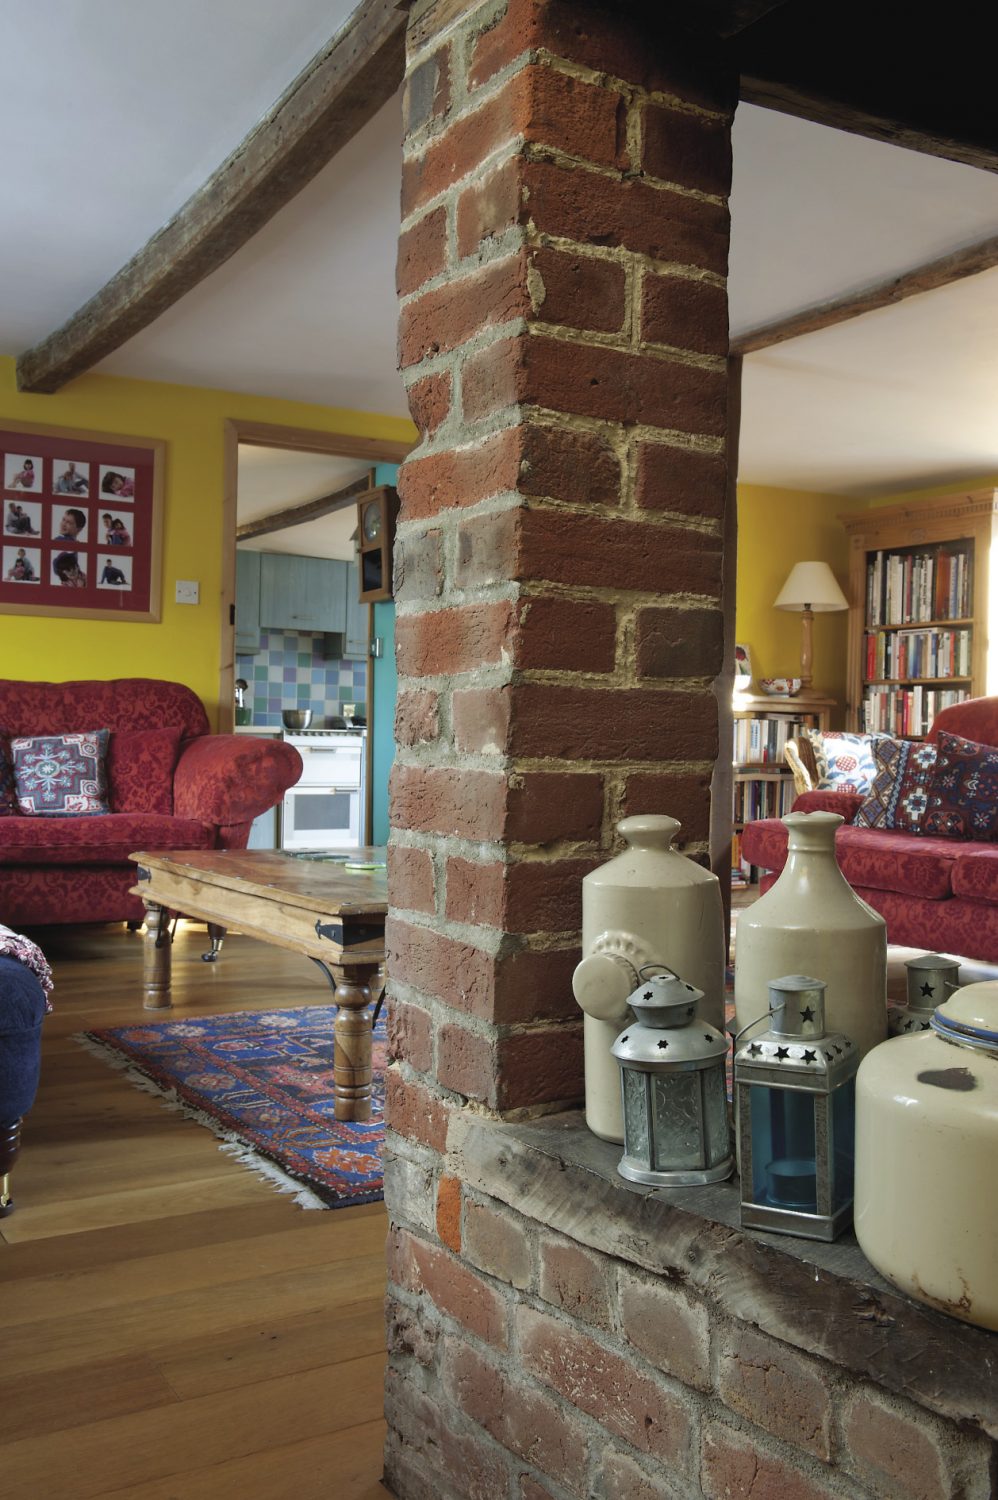 The focal pnt of the sitting room is a huge brick inglenook fireplace with a woodburning stove